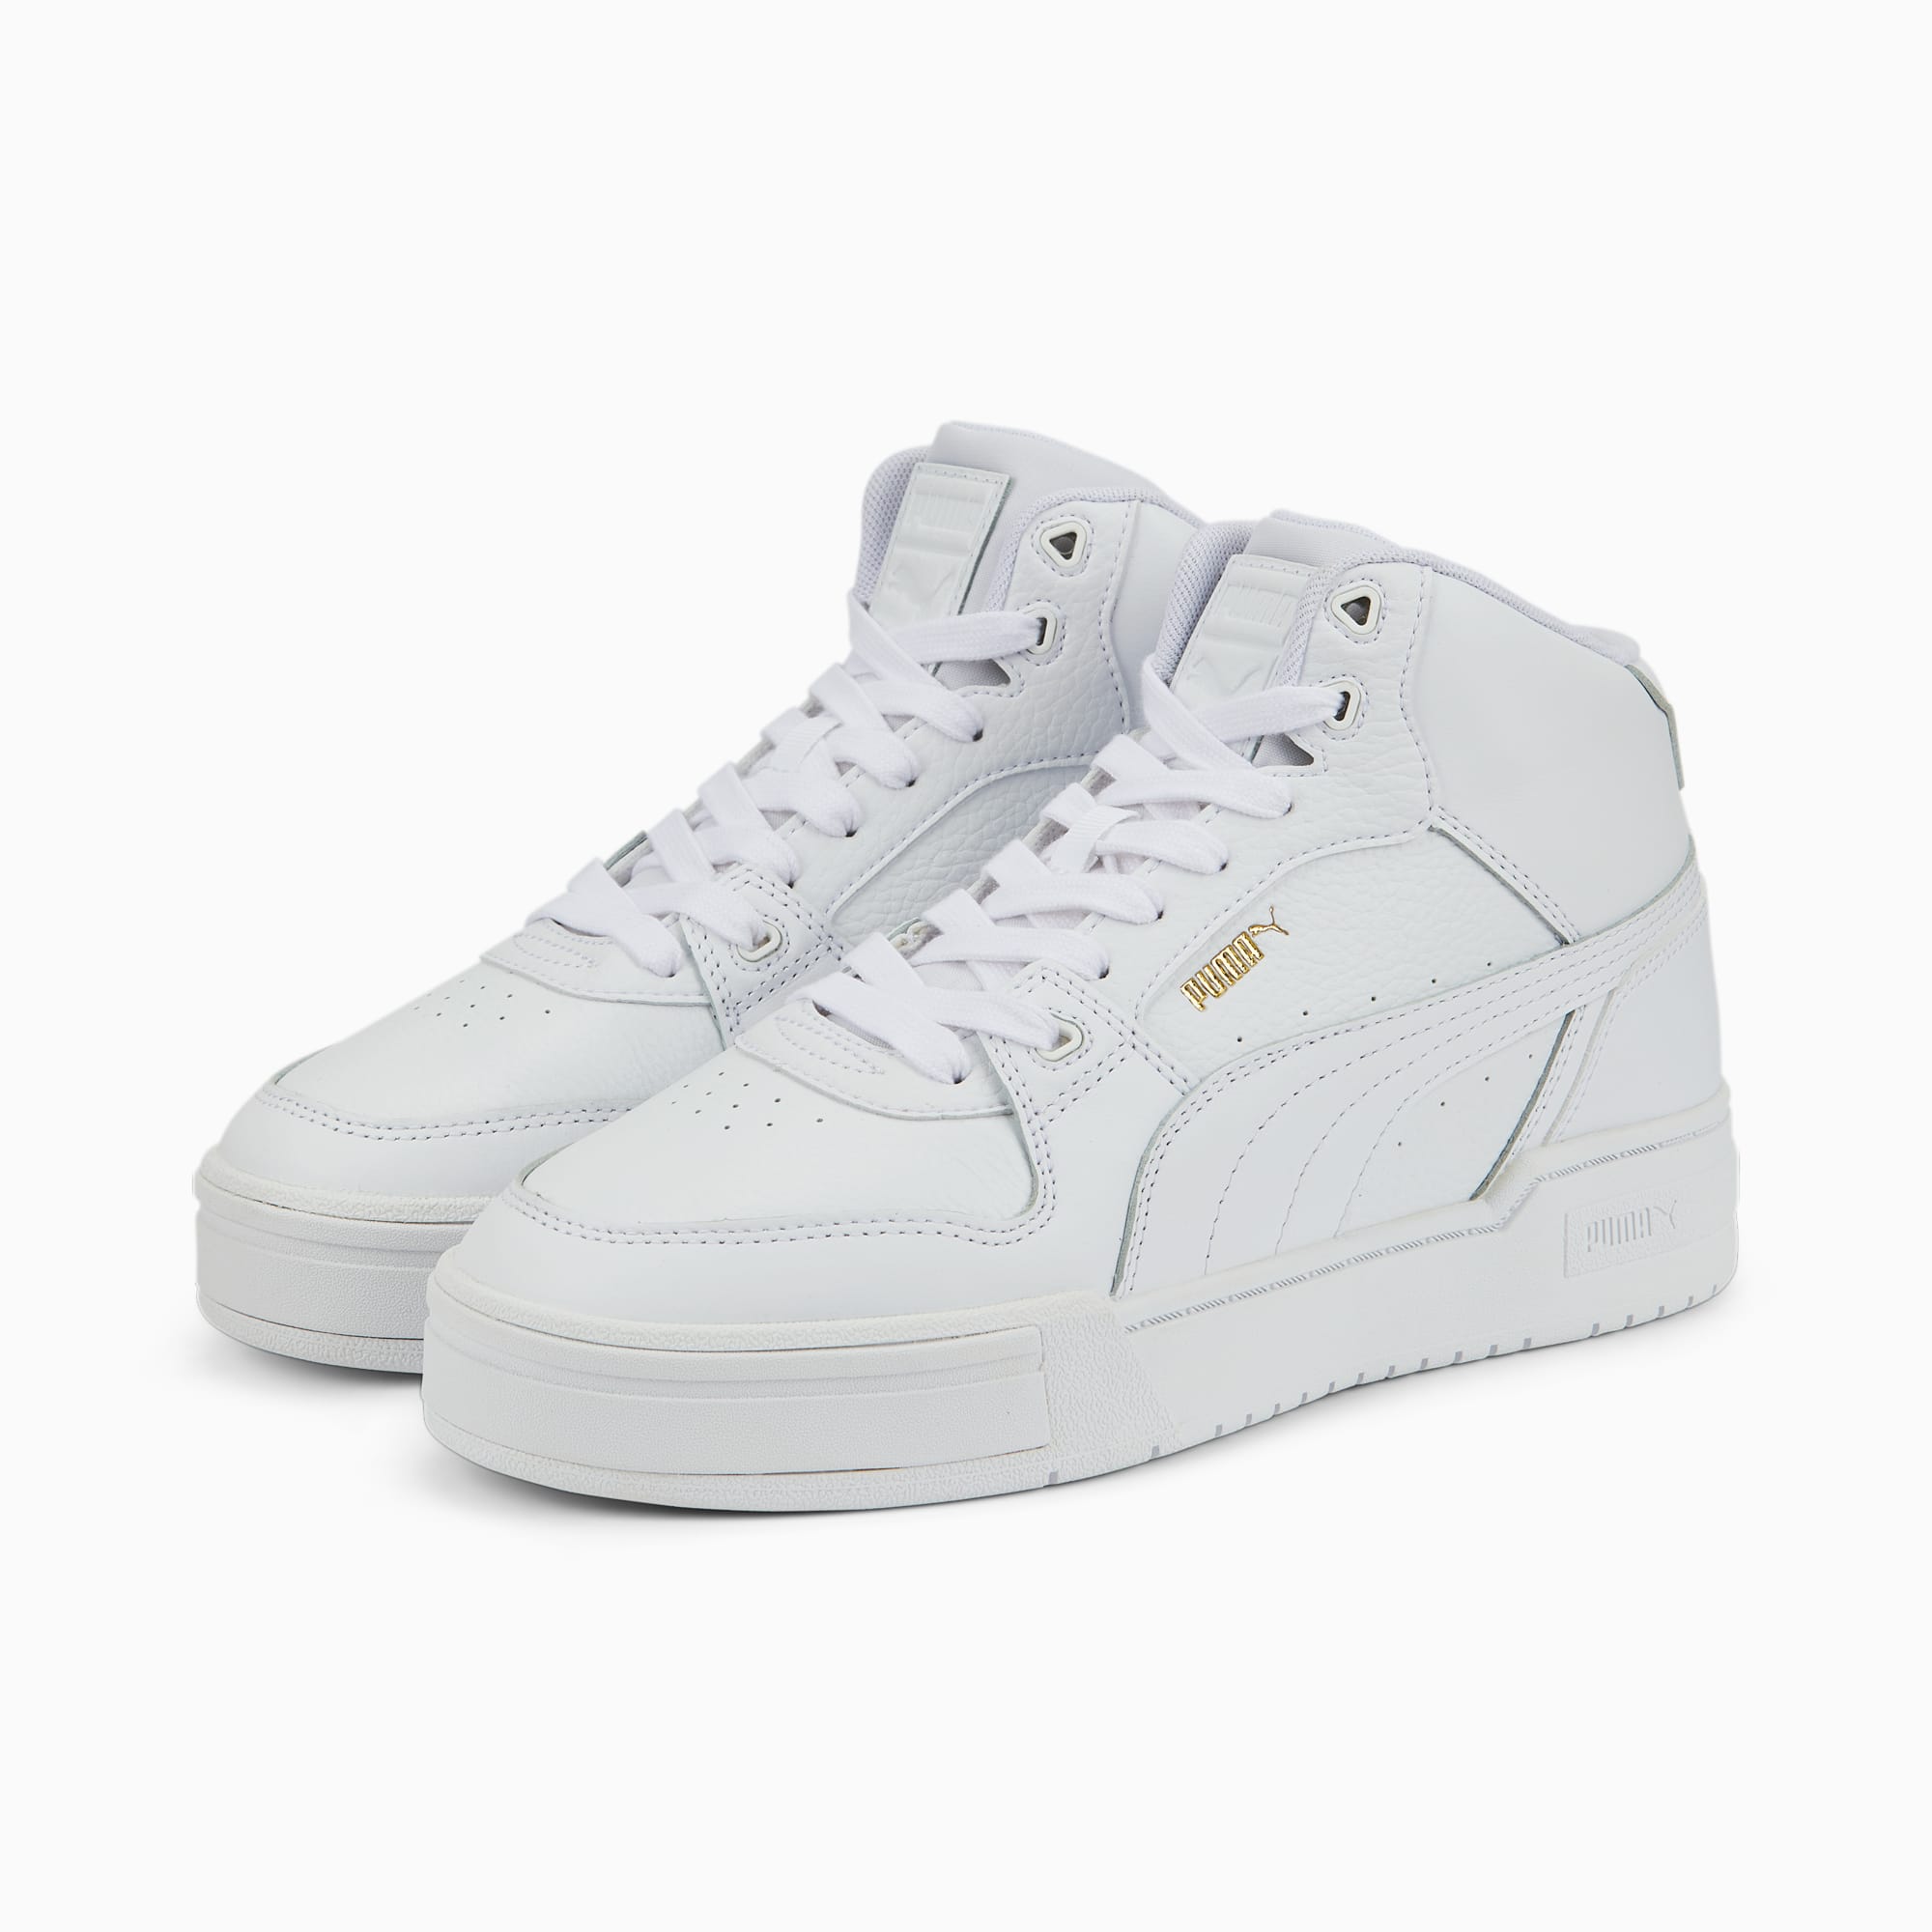 Men's PUMA Ca Pro Mid Sneakers, White/Gold, Size 35,5, Shoes